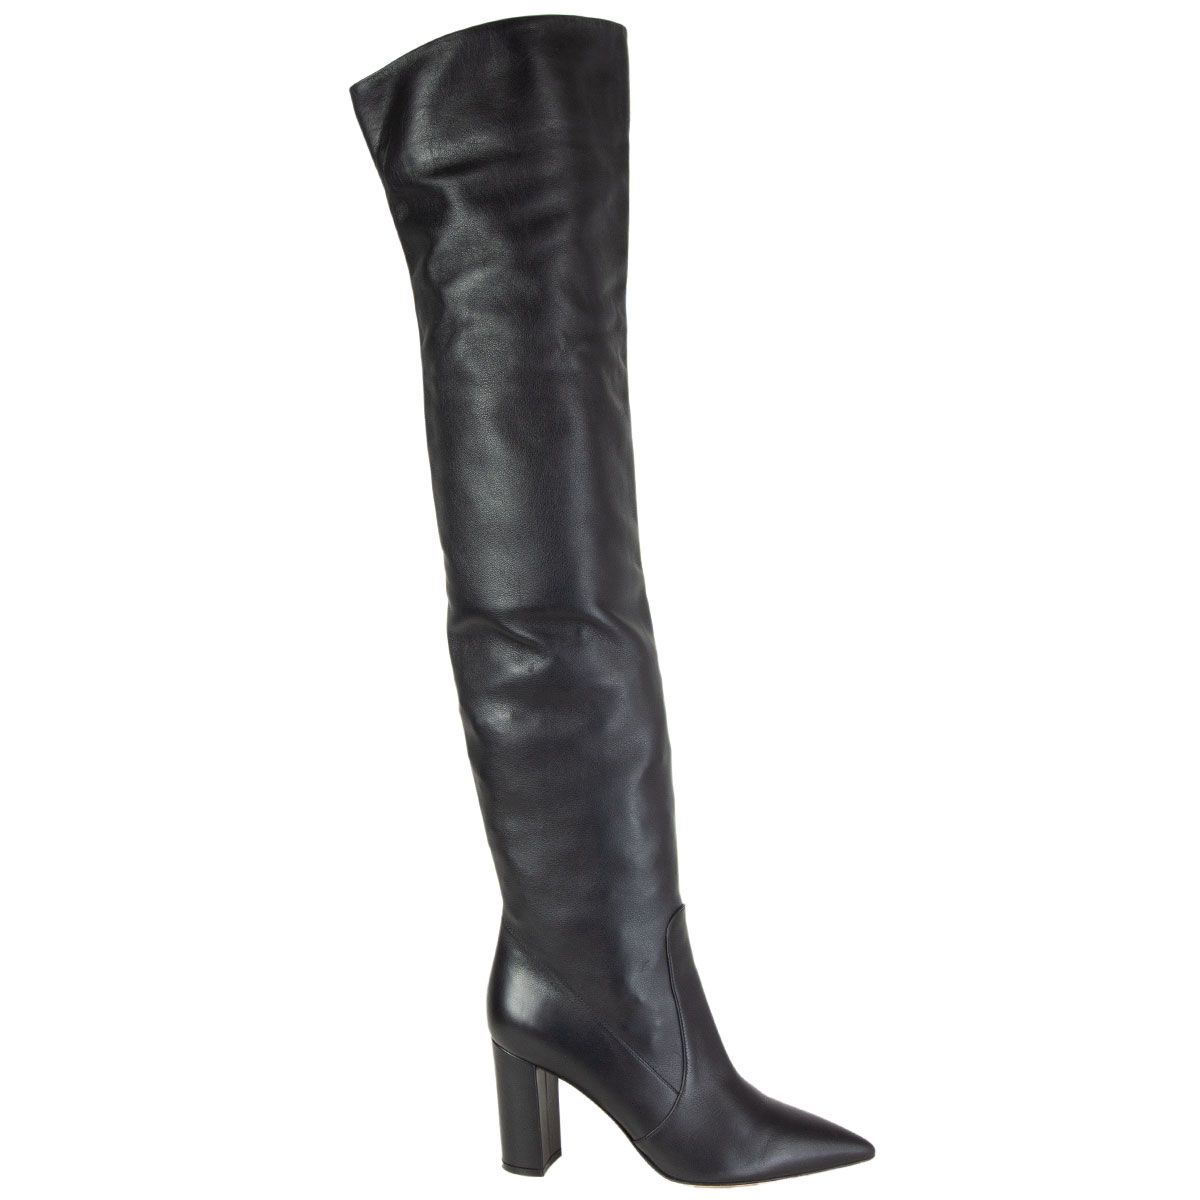 Spirit Black Suede Knee High Boots Discover leather & suede ankle boots,  boots, sandals & trainers at Carl Scarpa.com